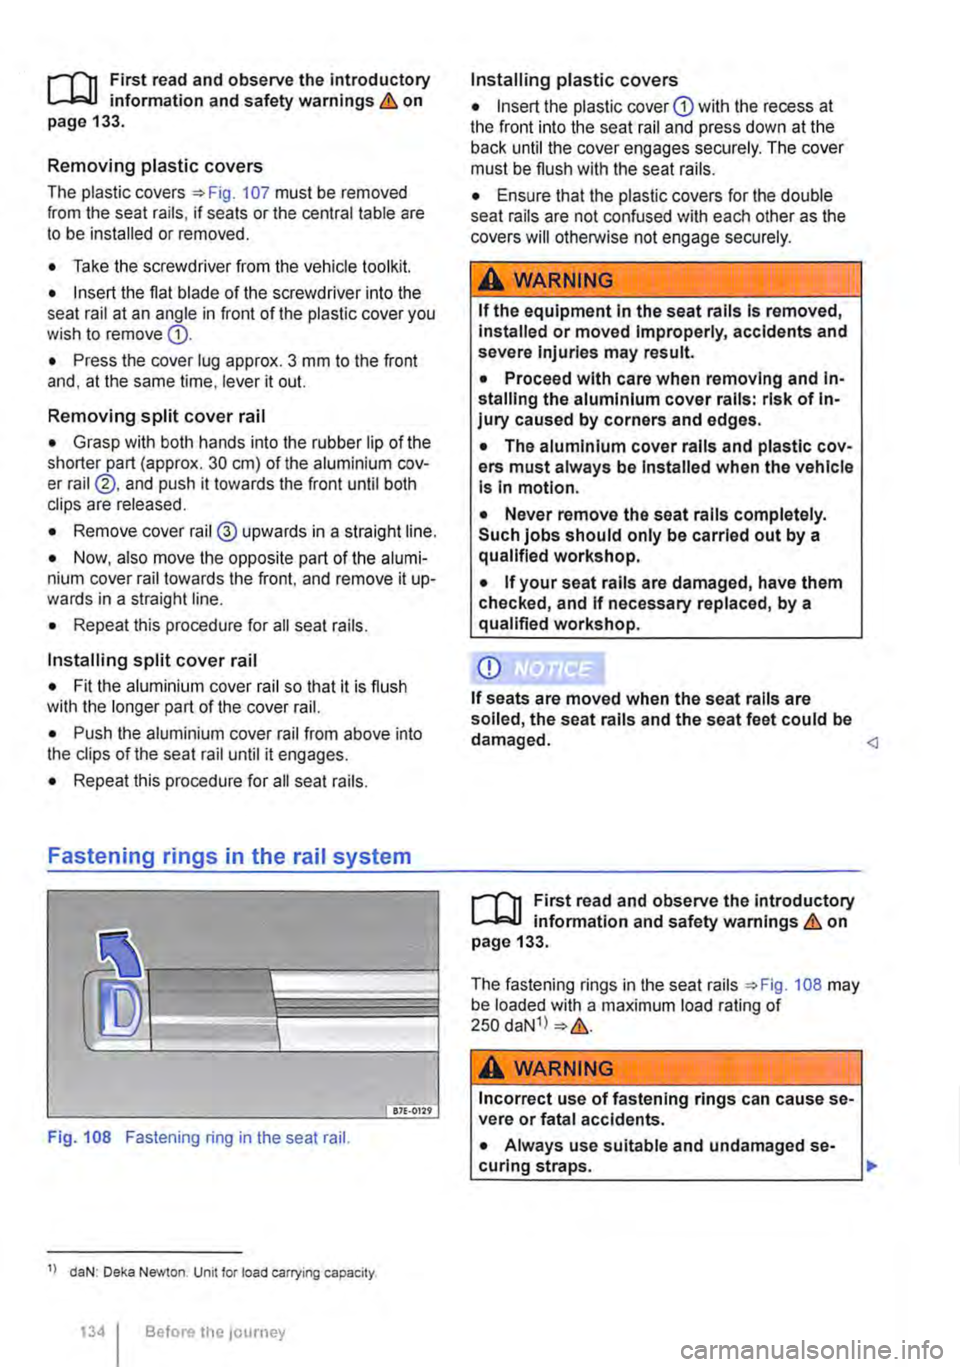 VOLKSWAGEN TRANSPORTER 2011  Owners Manual t"""""fl1 First read and observe the introductory l..--bll information and safety warnings & on page 133. 
Removing plastic covers 
The plastic covers=:. Fig. 107 must be removed from the seat rails, 